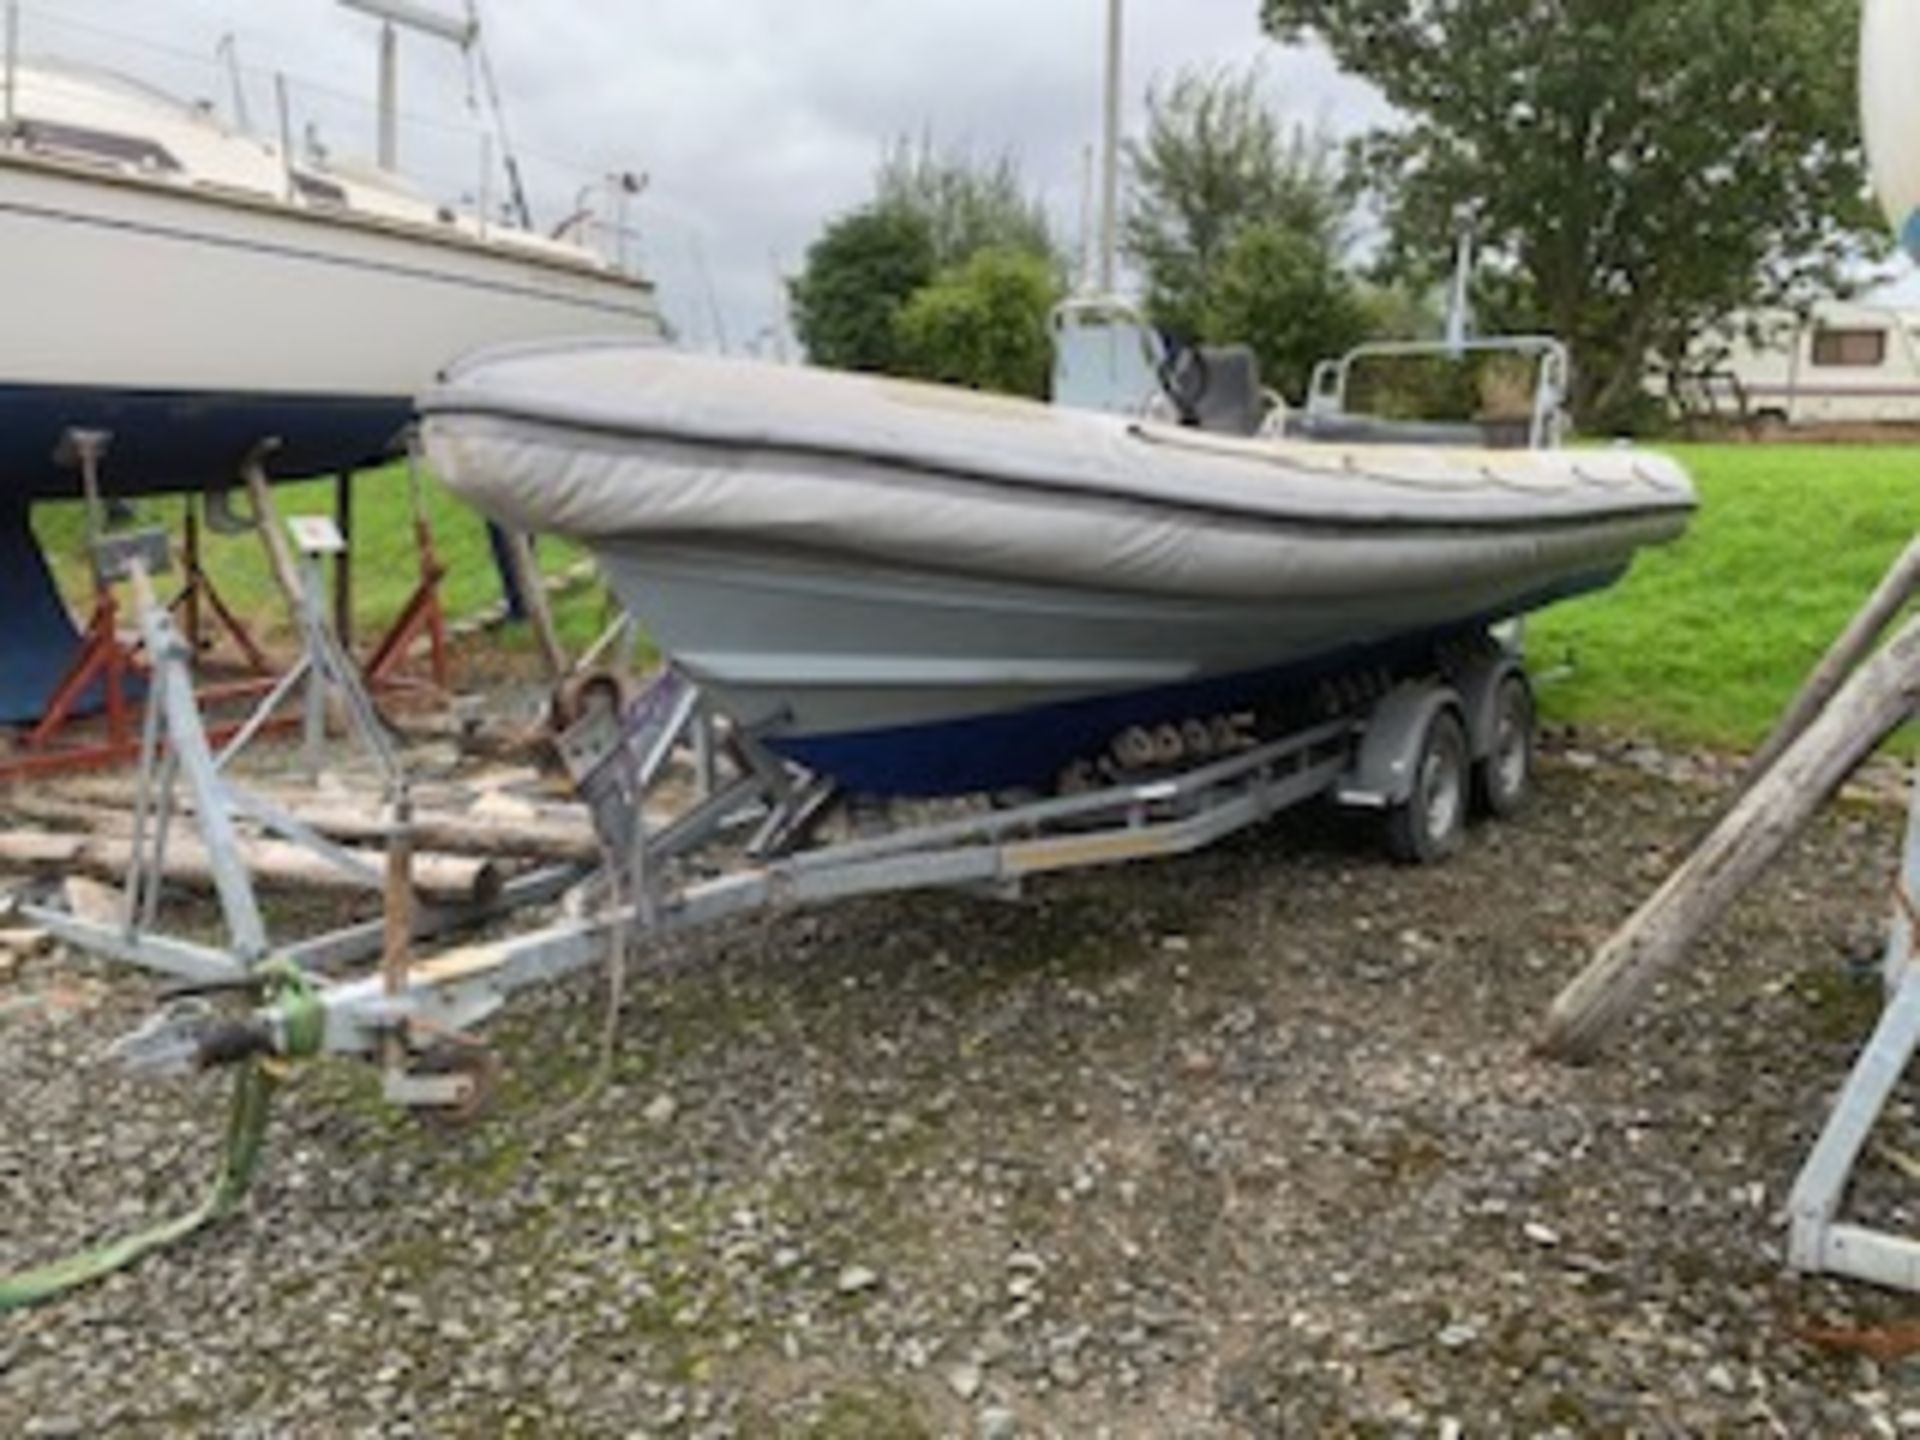 PACIFIC 22 RIB C/W IN BOARD FORD MERMAID DIESEL ENGINE AND GALVANISED TRAILER, TUBES REPLACED WHEN